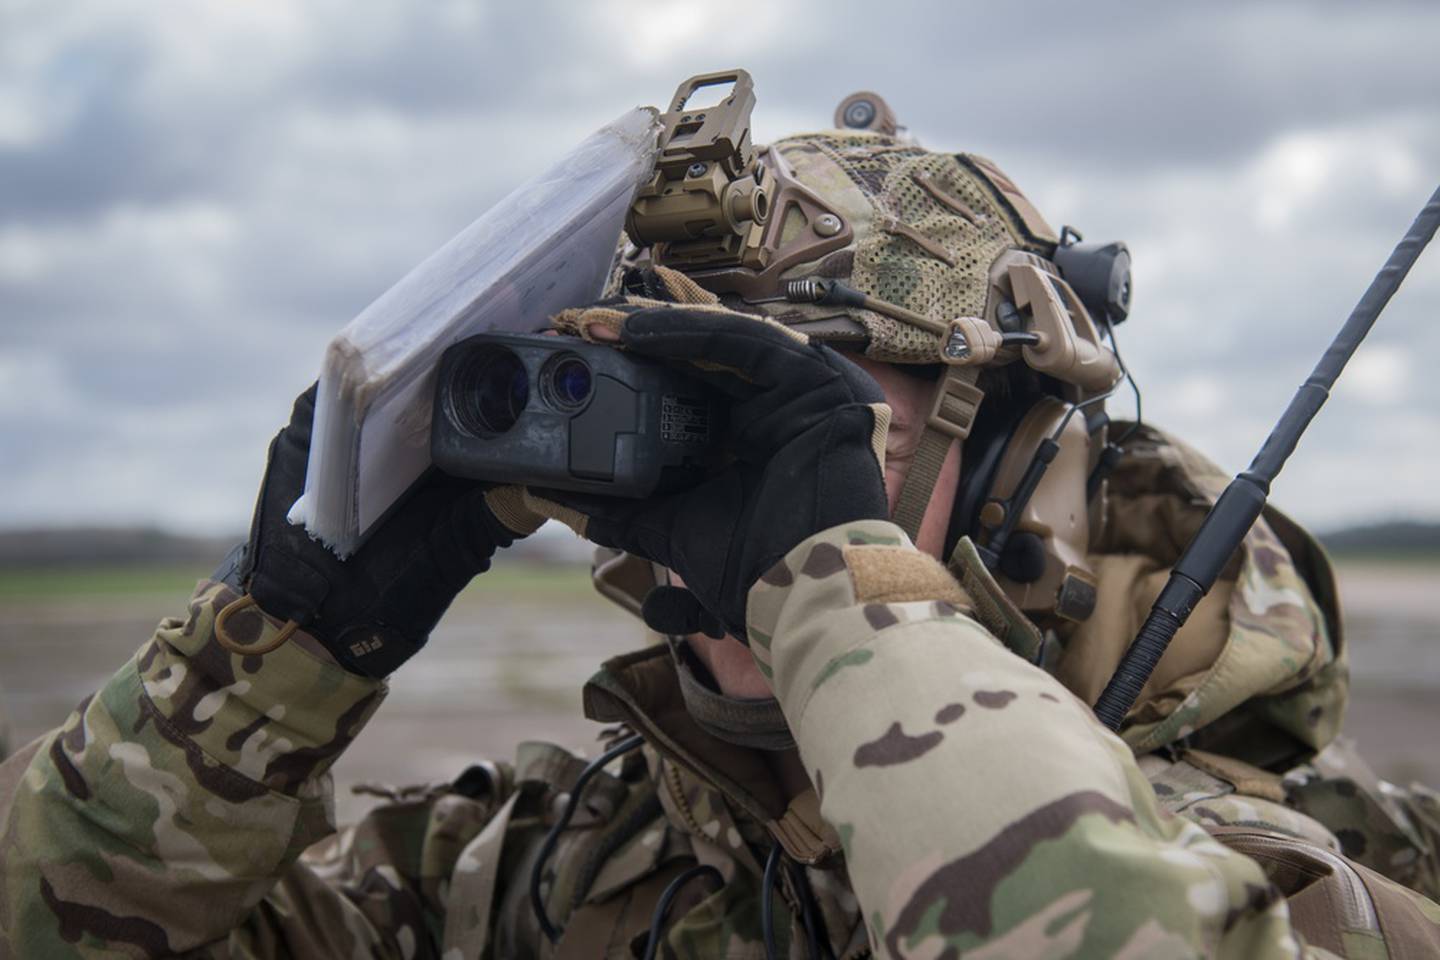 A special tactics operator stationed at the 352nd Special Operations Wing at RAF Mildenhall uses a scope to look at a target while training for close air support during exercise Valiant Liberty at RAF Sculthorpe Training Range, U.K., March 9, 2020. (Staff Sgt. Rose Gudex/Air Force)